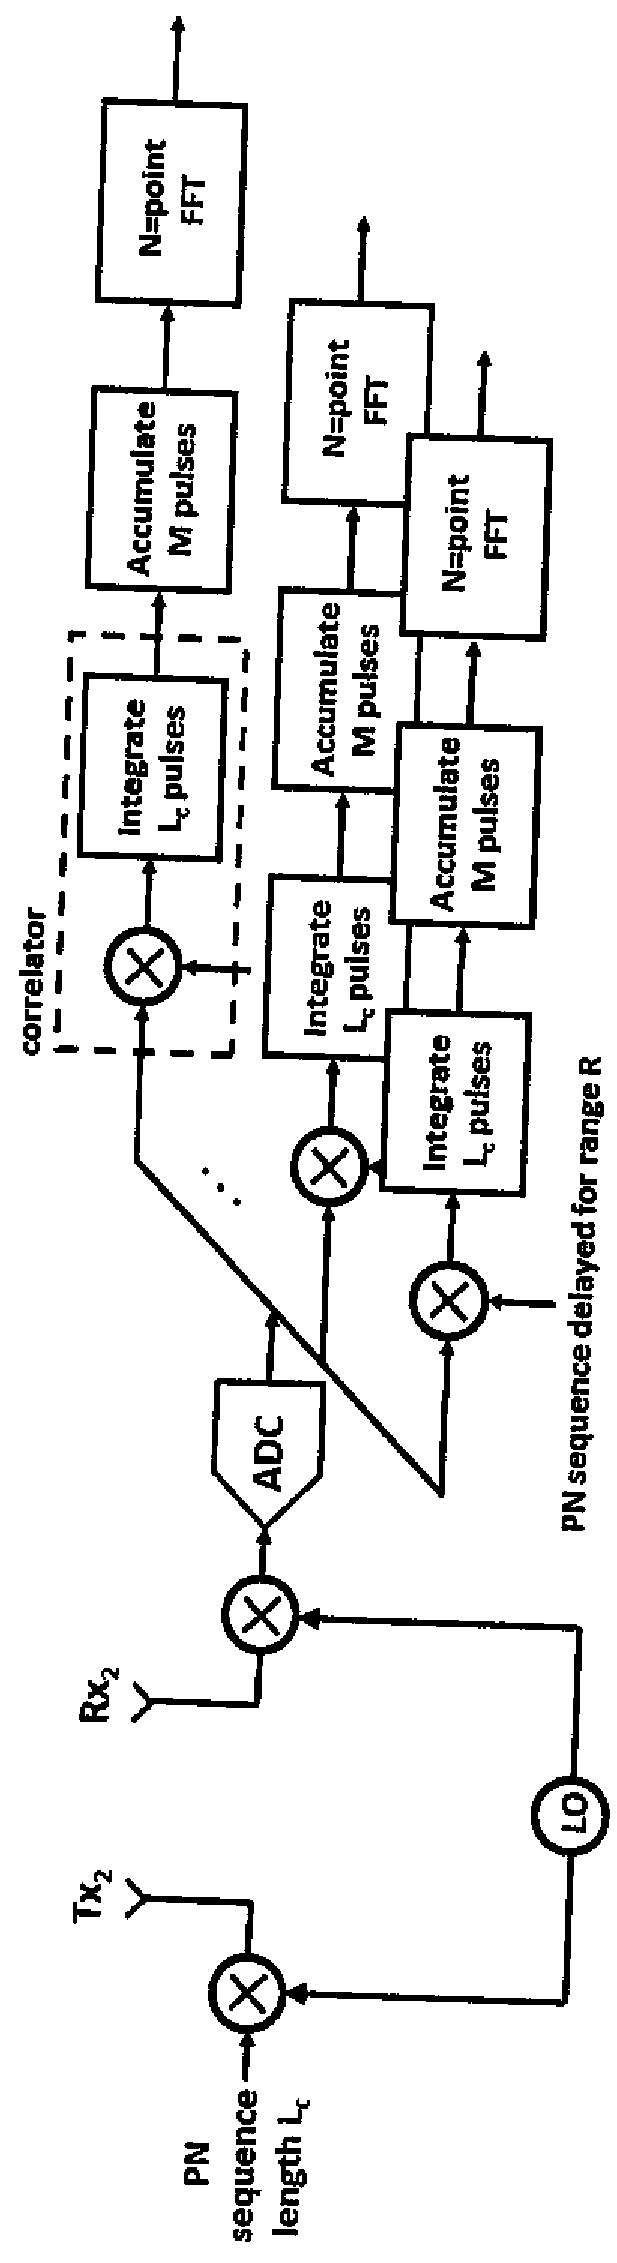 Phase-modulated continuous wave radar system (with prbs codes)